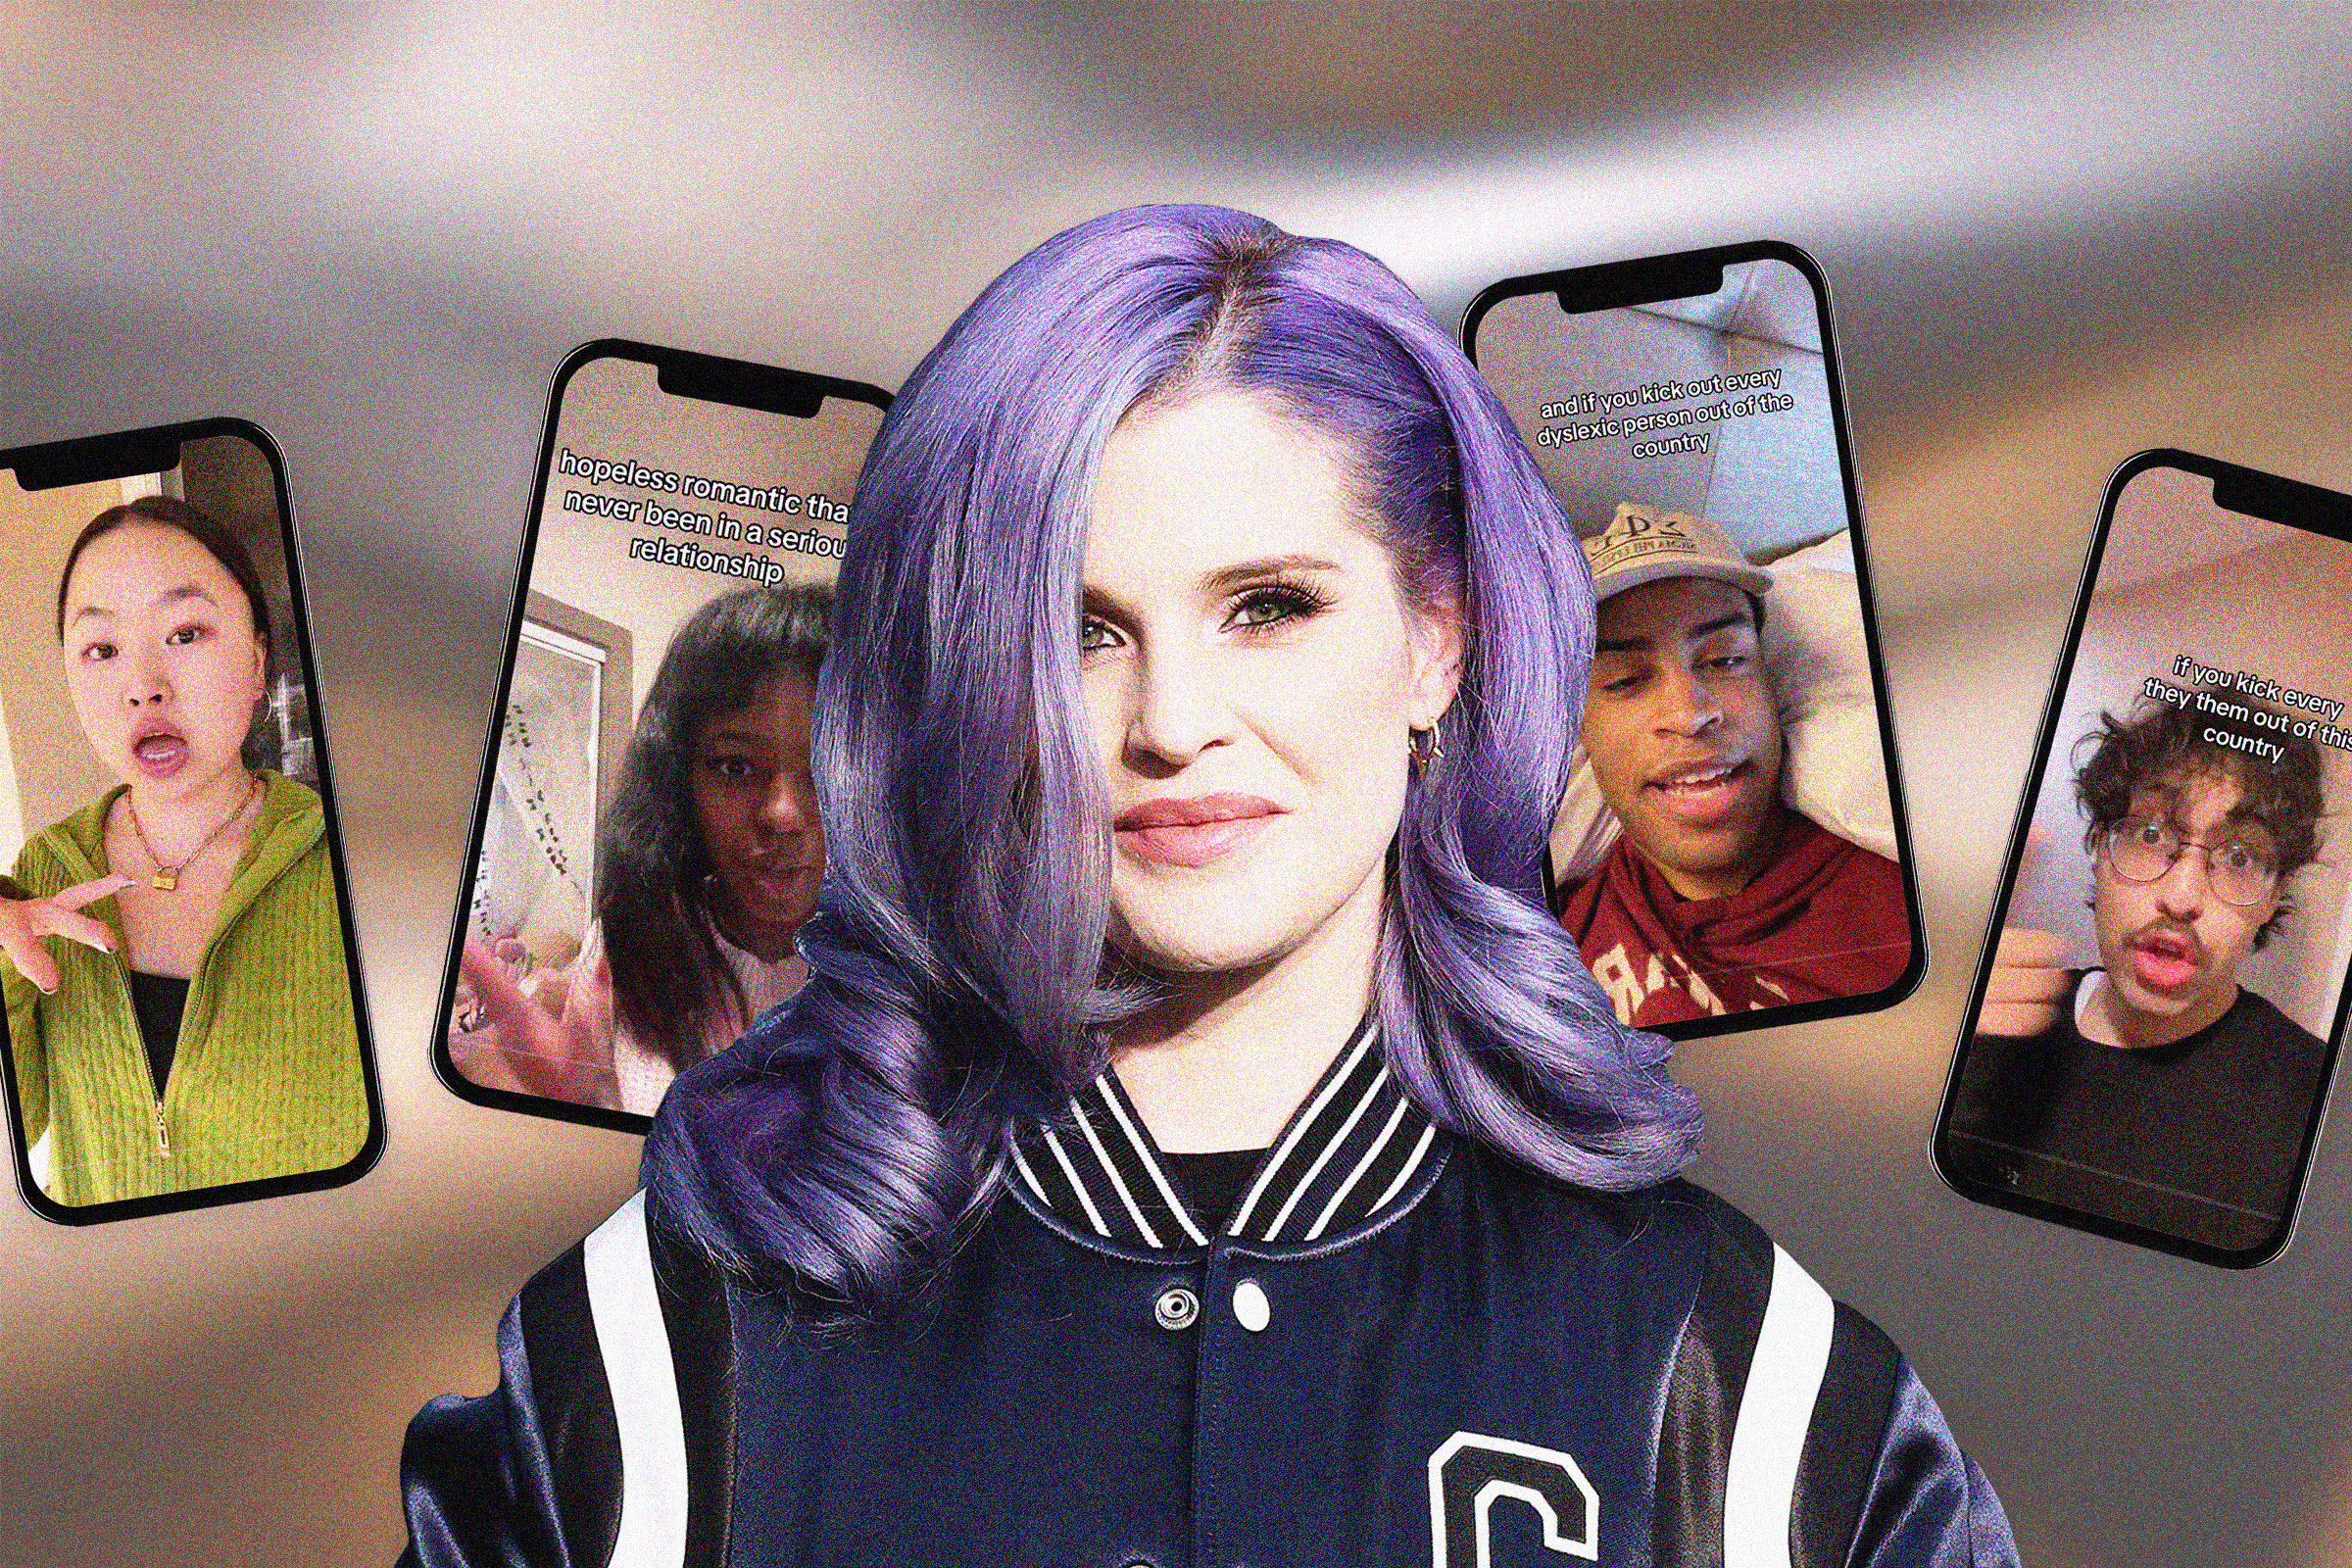 A photo illustration depicting Kelly Osbourne with phones behind her showing different TikTok videos